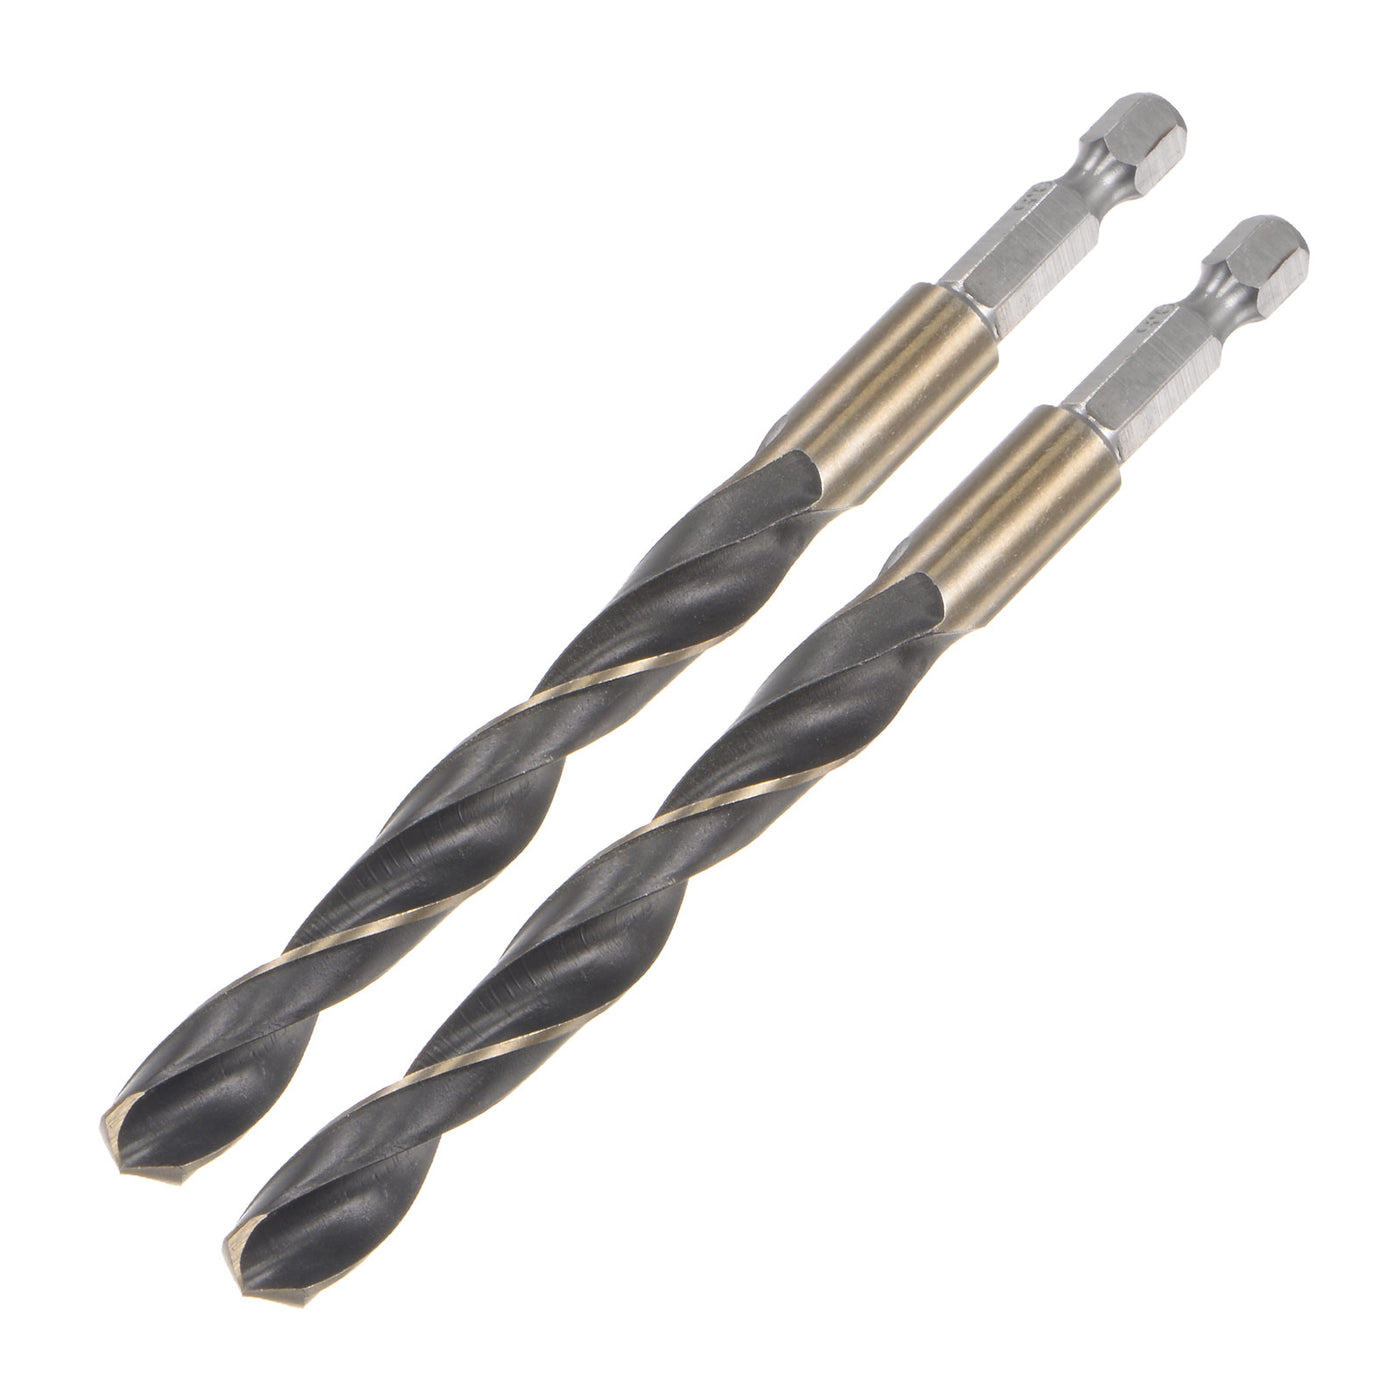 uxcell Uxcell 2Pcs 9.5mm High Speed Steel Twist Drill Bit with Hex Shank 125mm Length